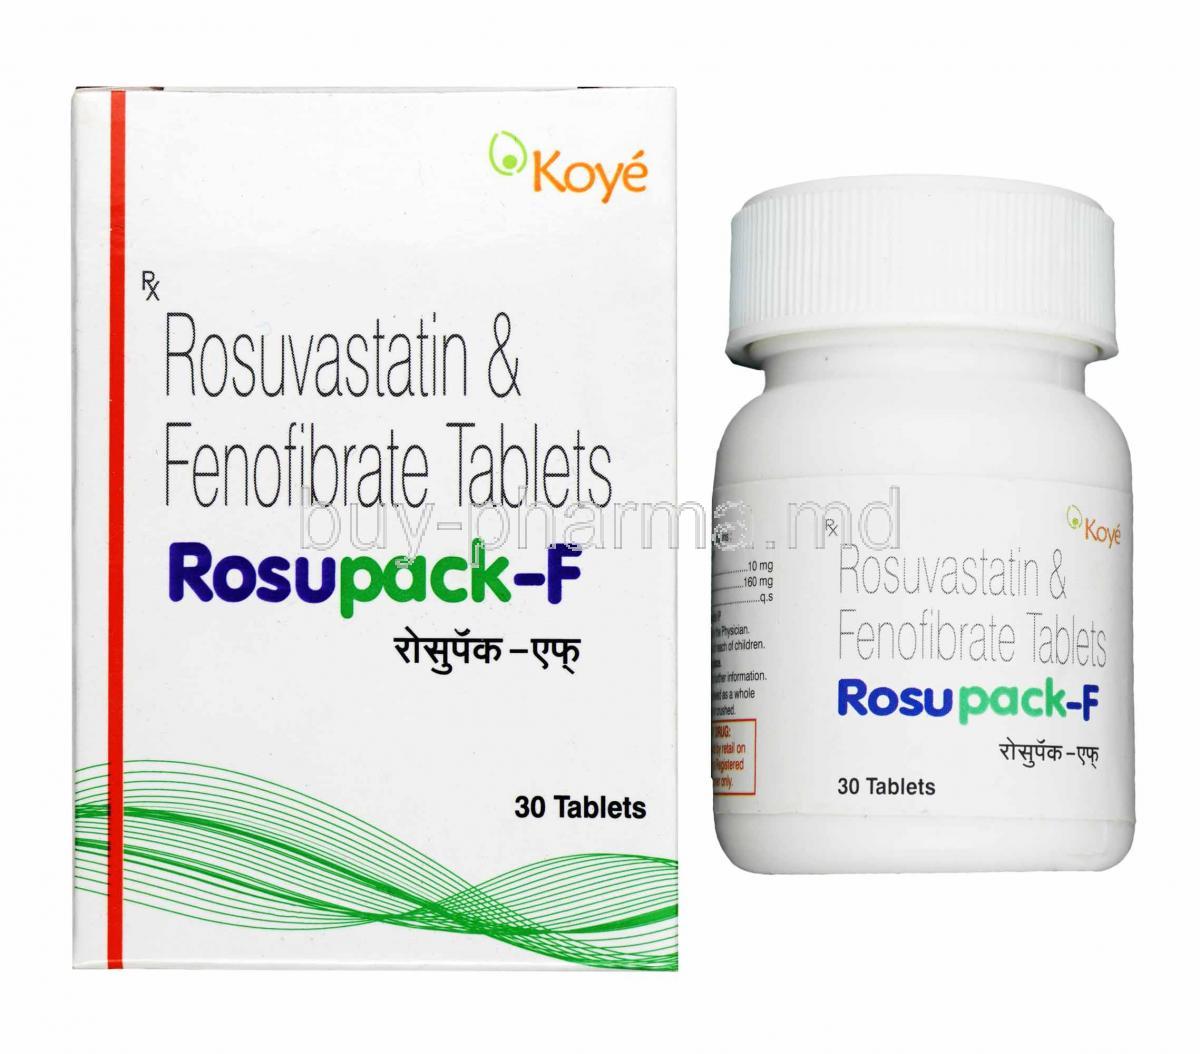 Rosupack-F, Fenofibrate and Rosuvastatin box and tablets